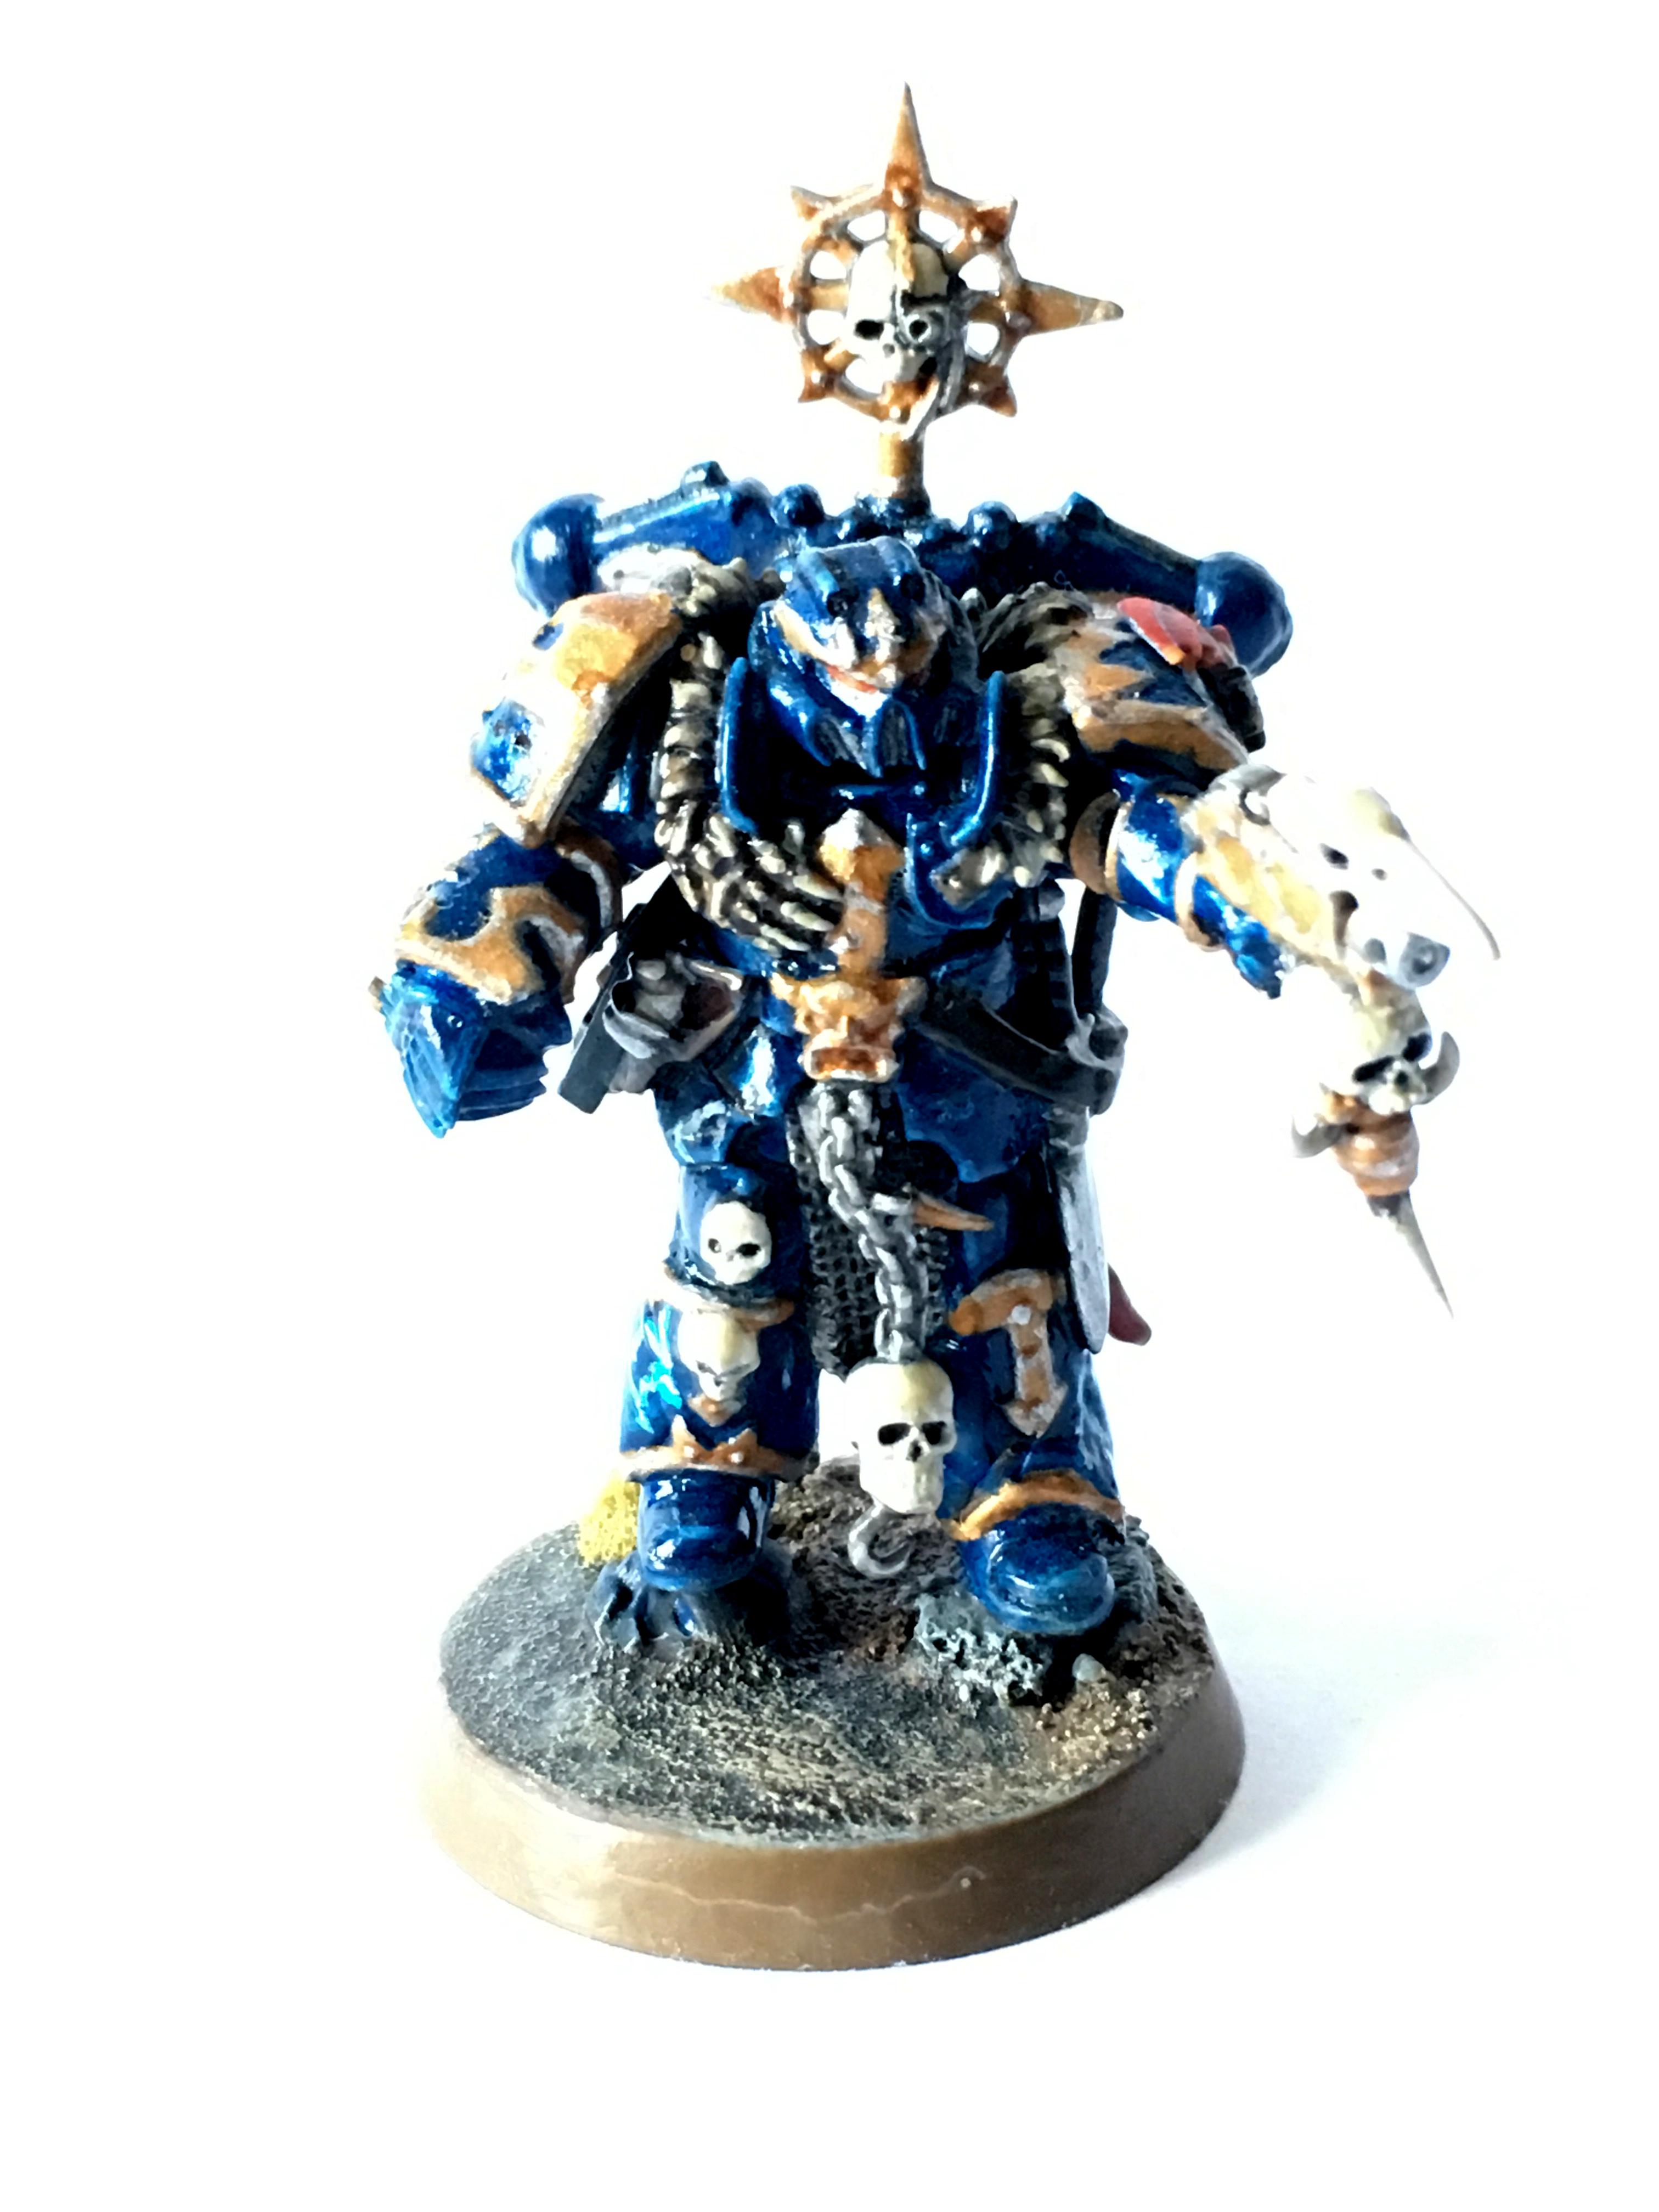 Chaos Space Marines, Night Lords, Warhammer 40,000